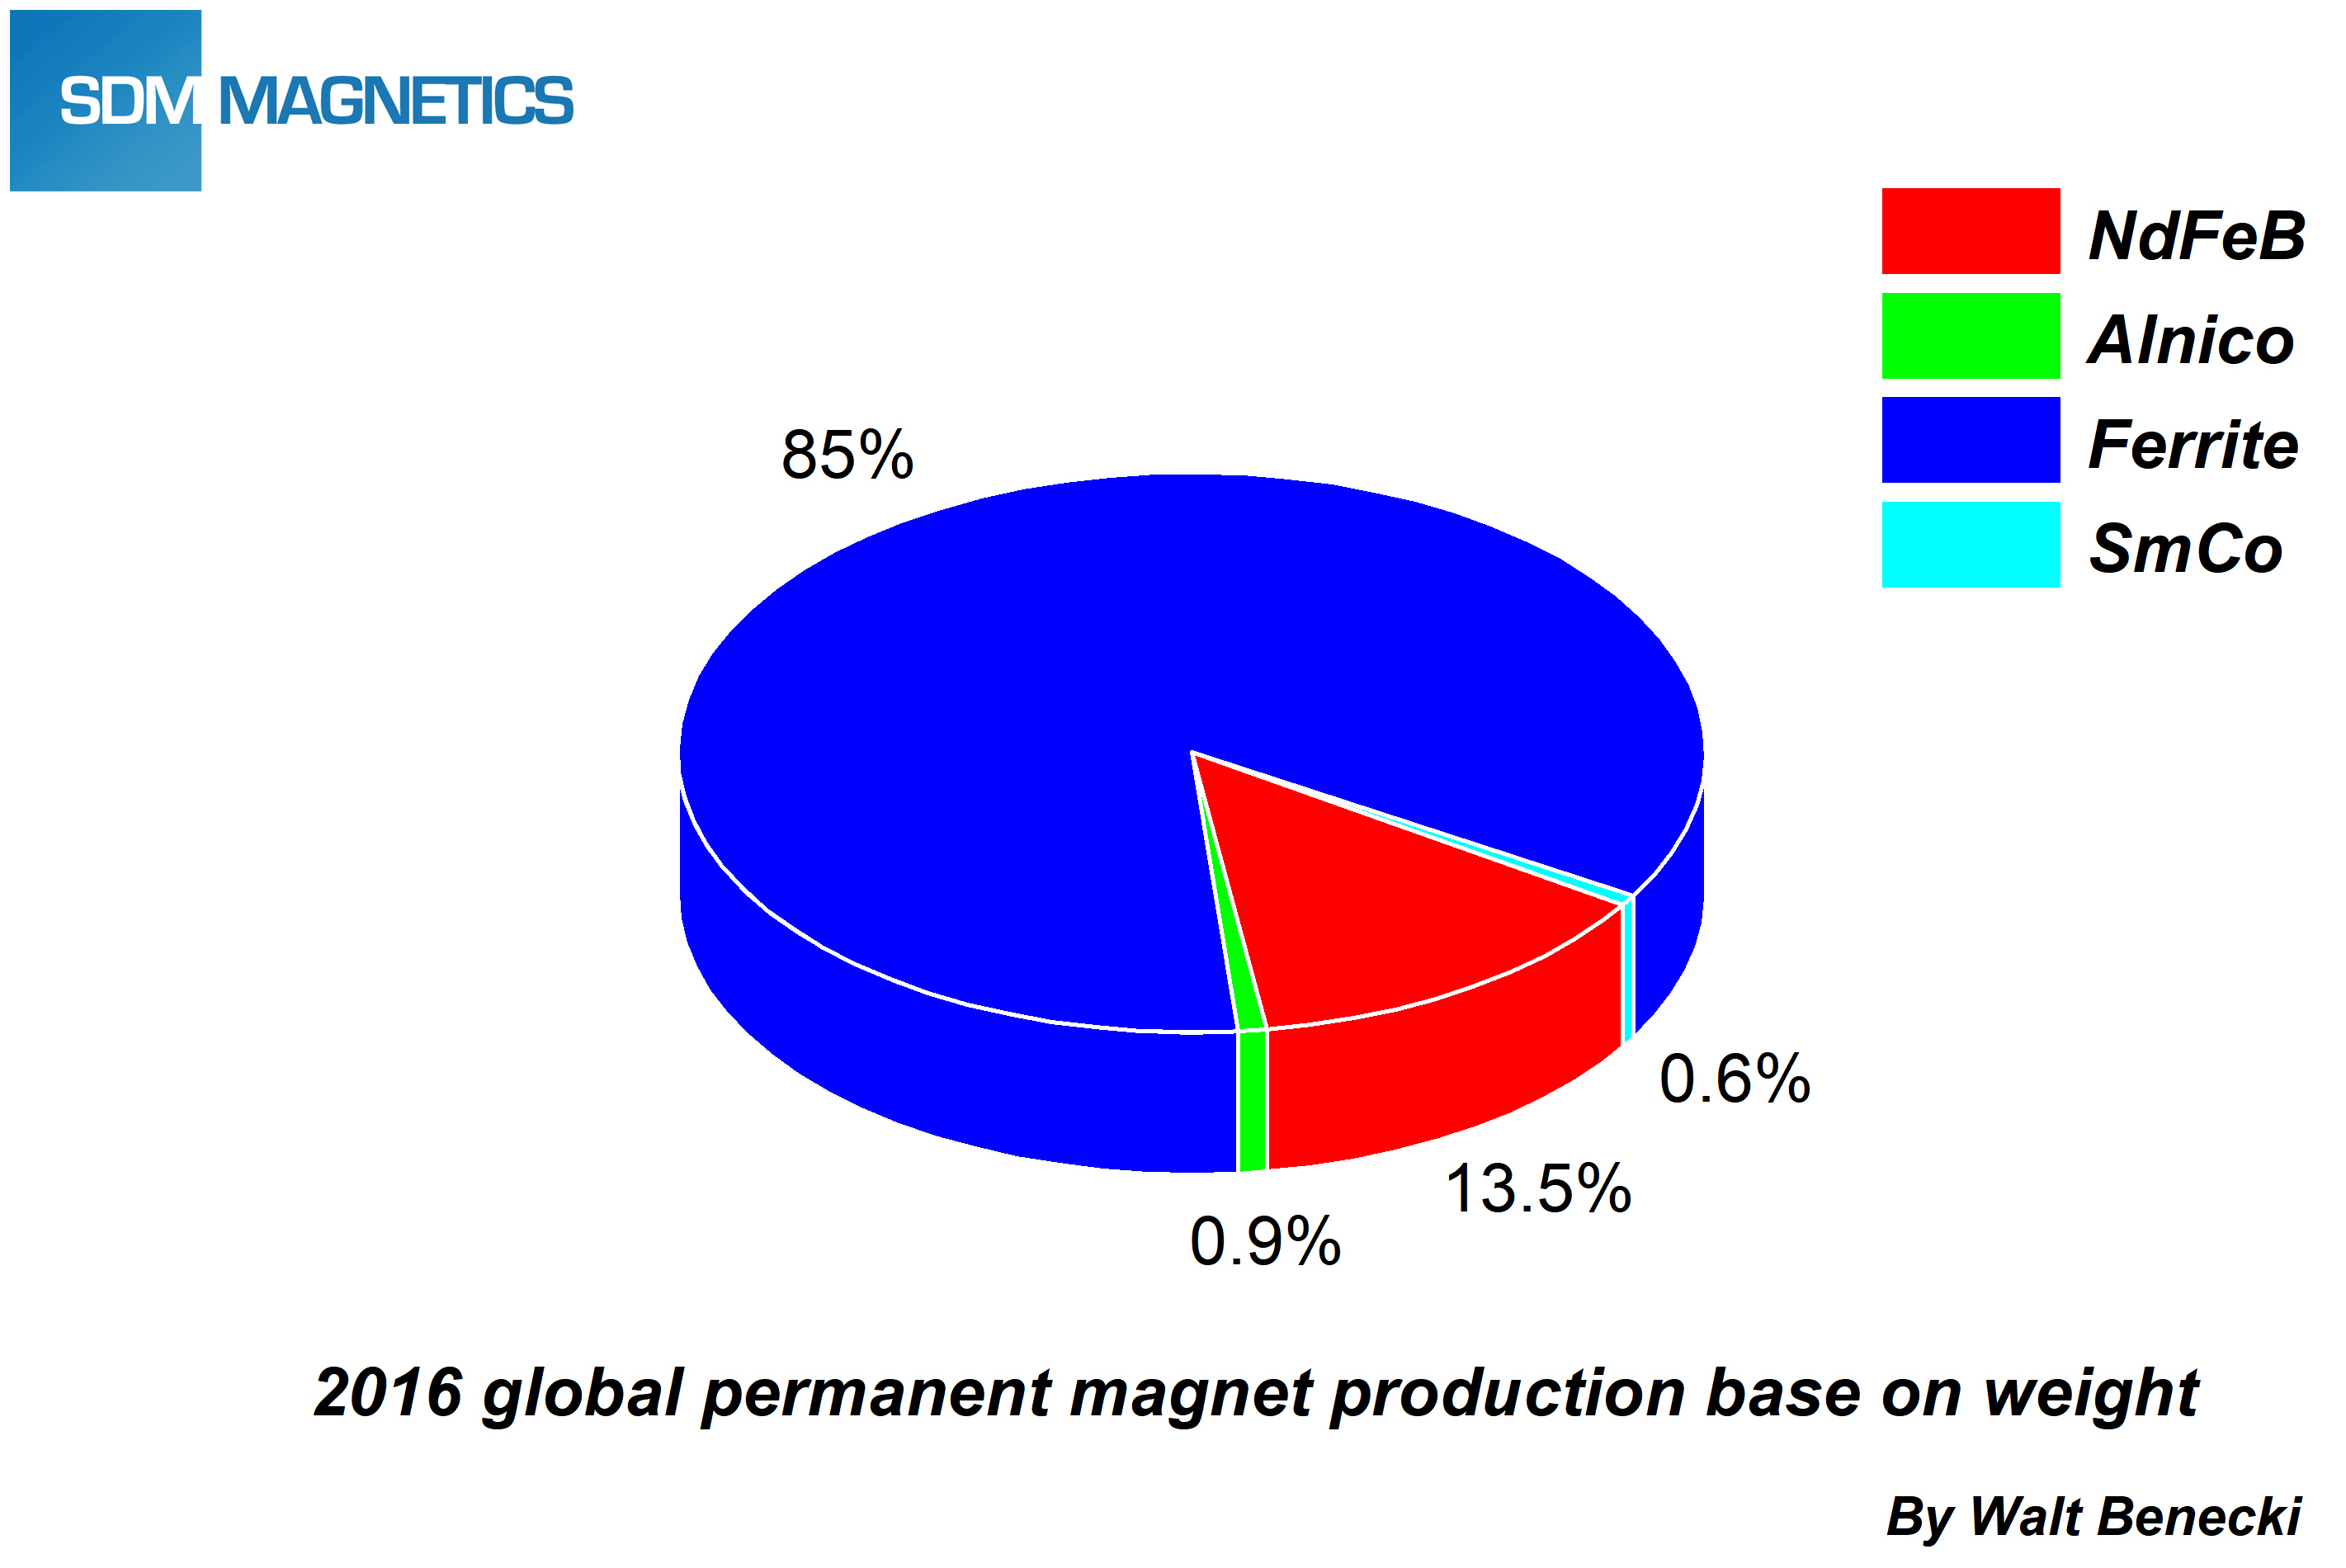 After Earth and Cobalt, why are Ferrite Magnet costs increasing?